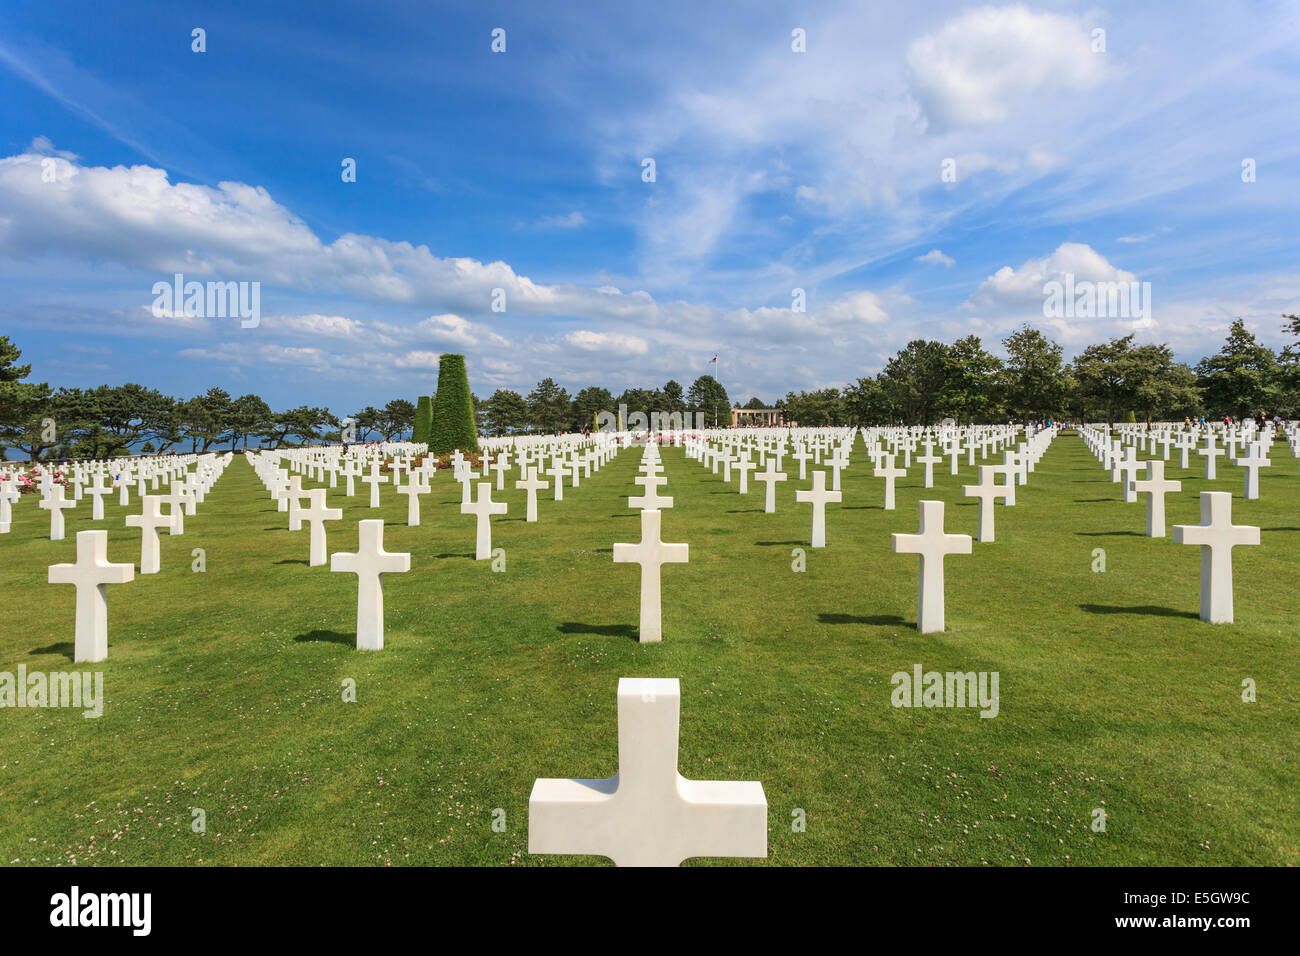 The American cemetery at Omaha Beach, Normandy, France. Here is about 10,000 American soldiers buried. Stock Photo